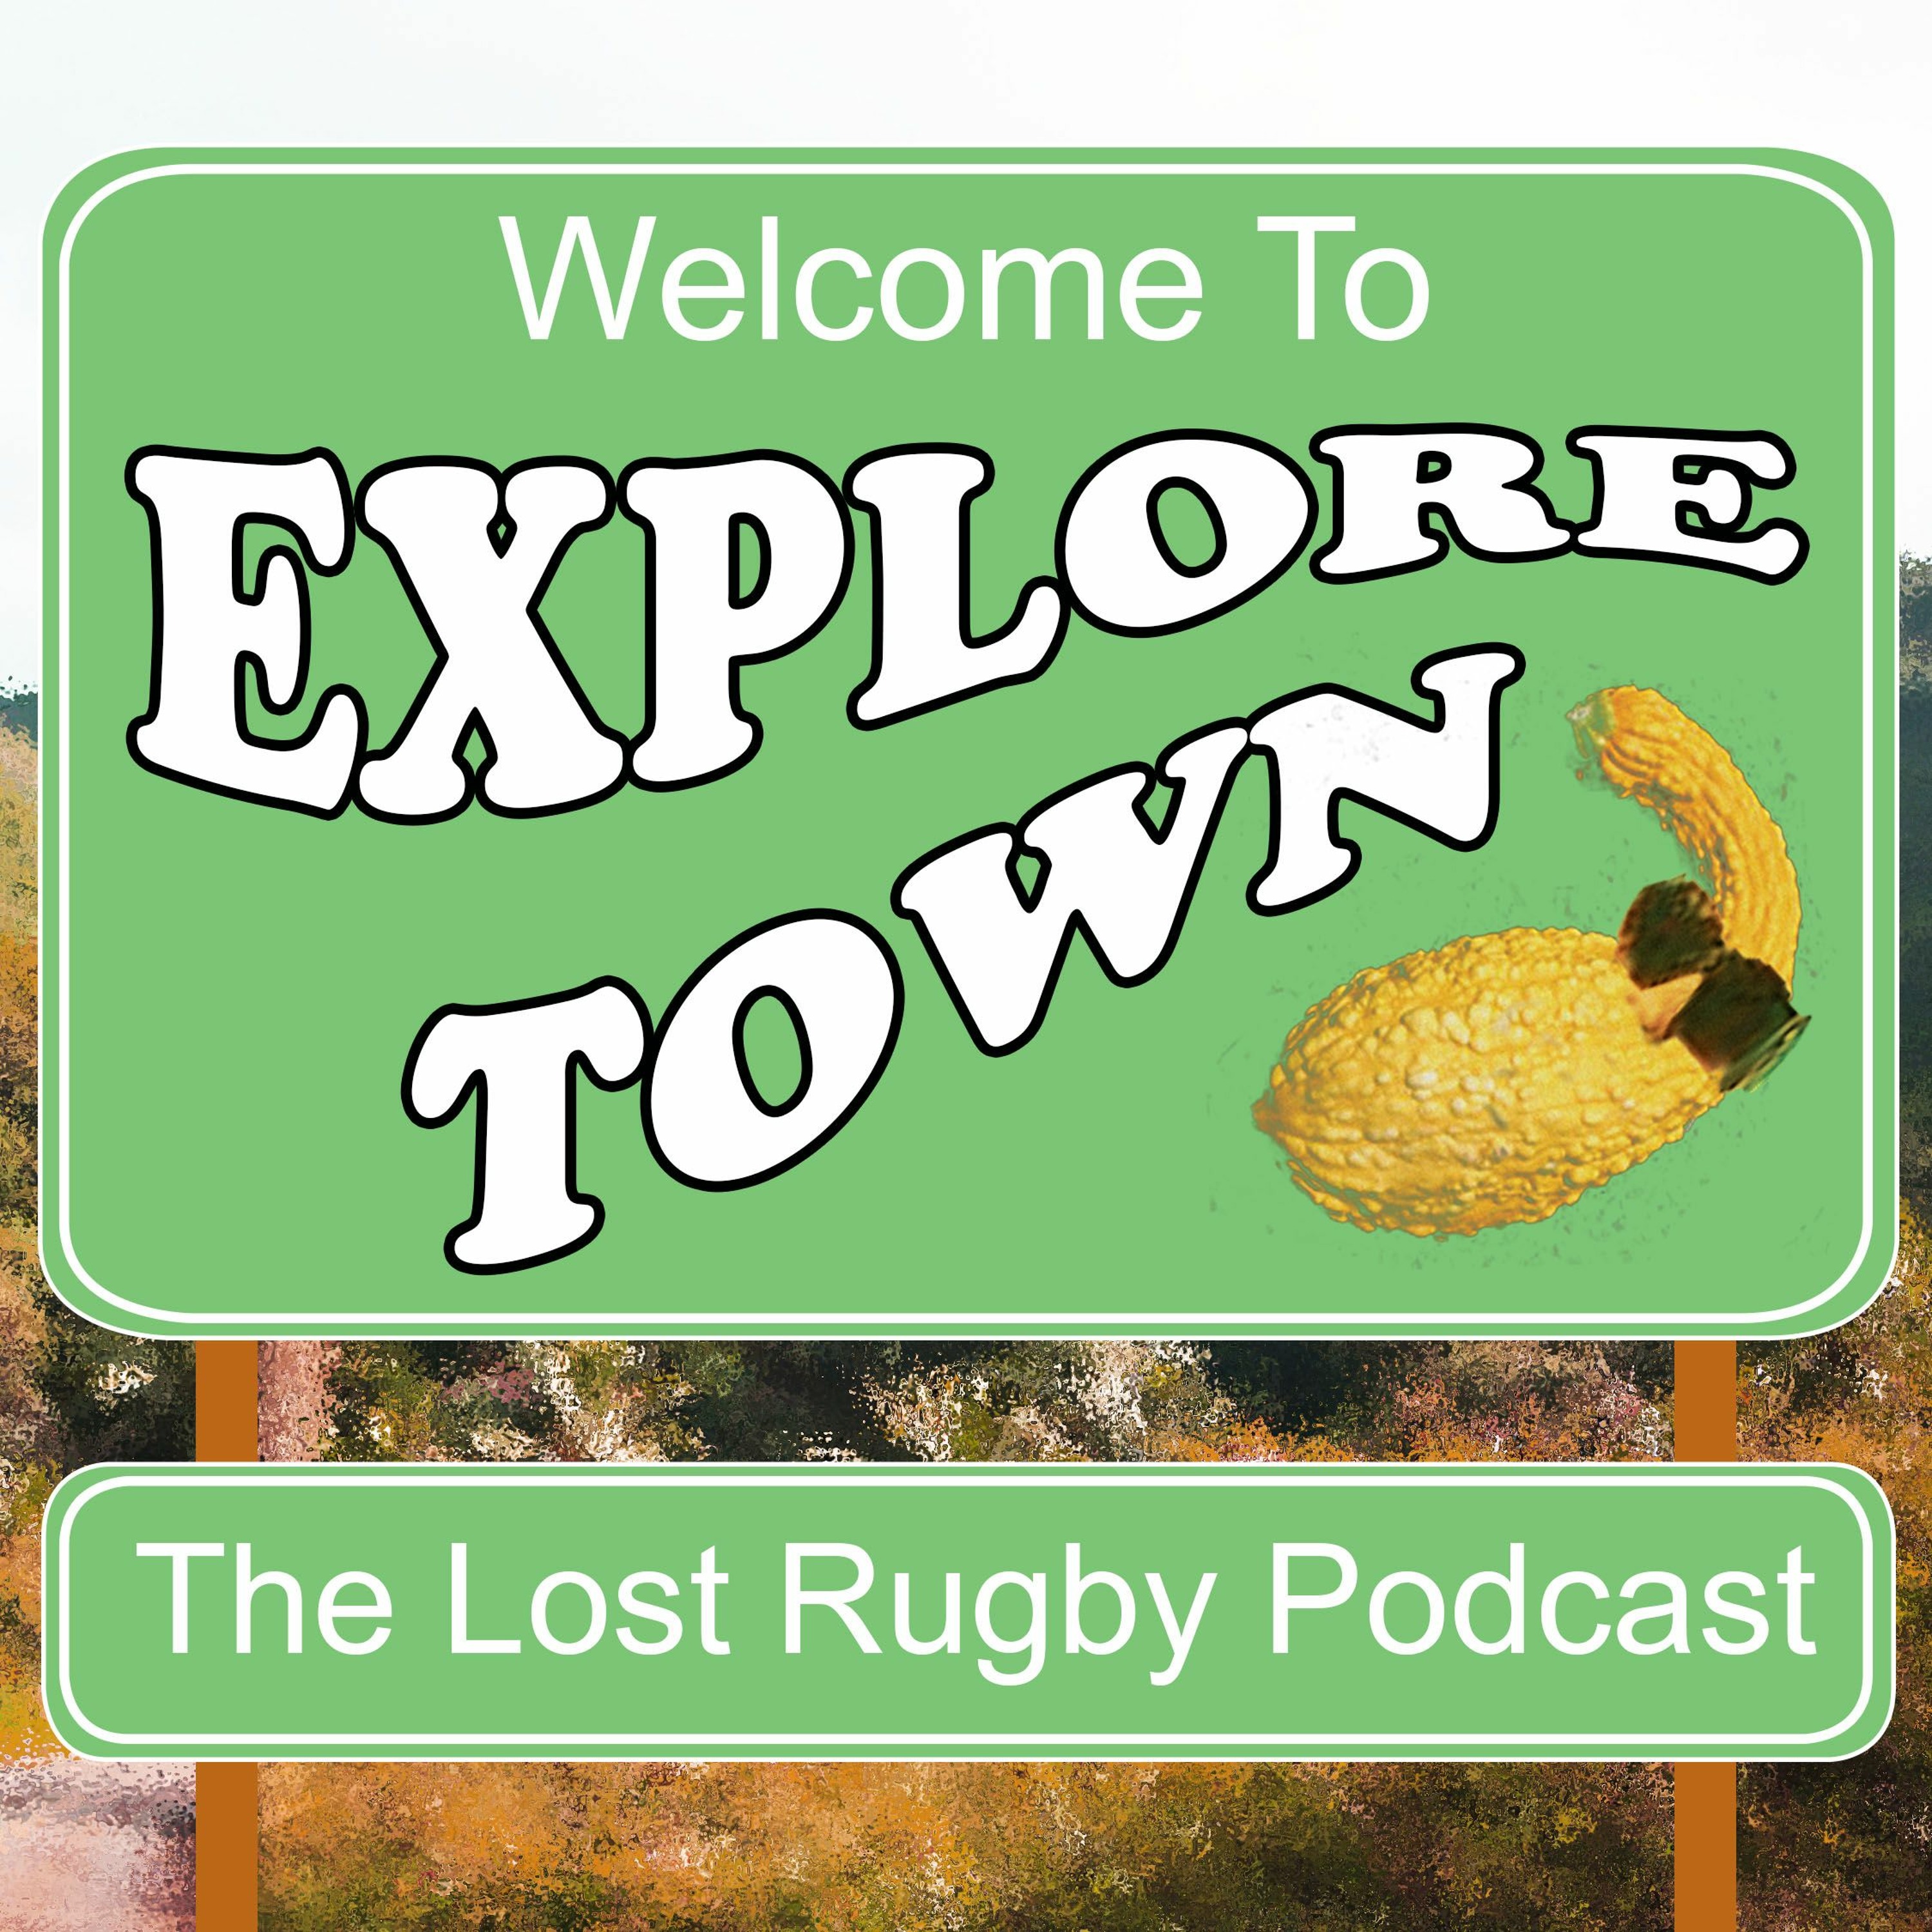 Explore Town: The Lost Rugby Podcast